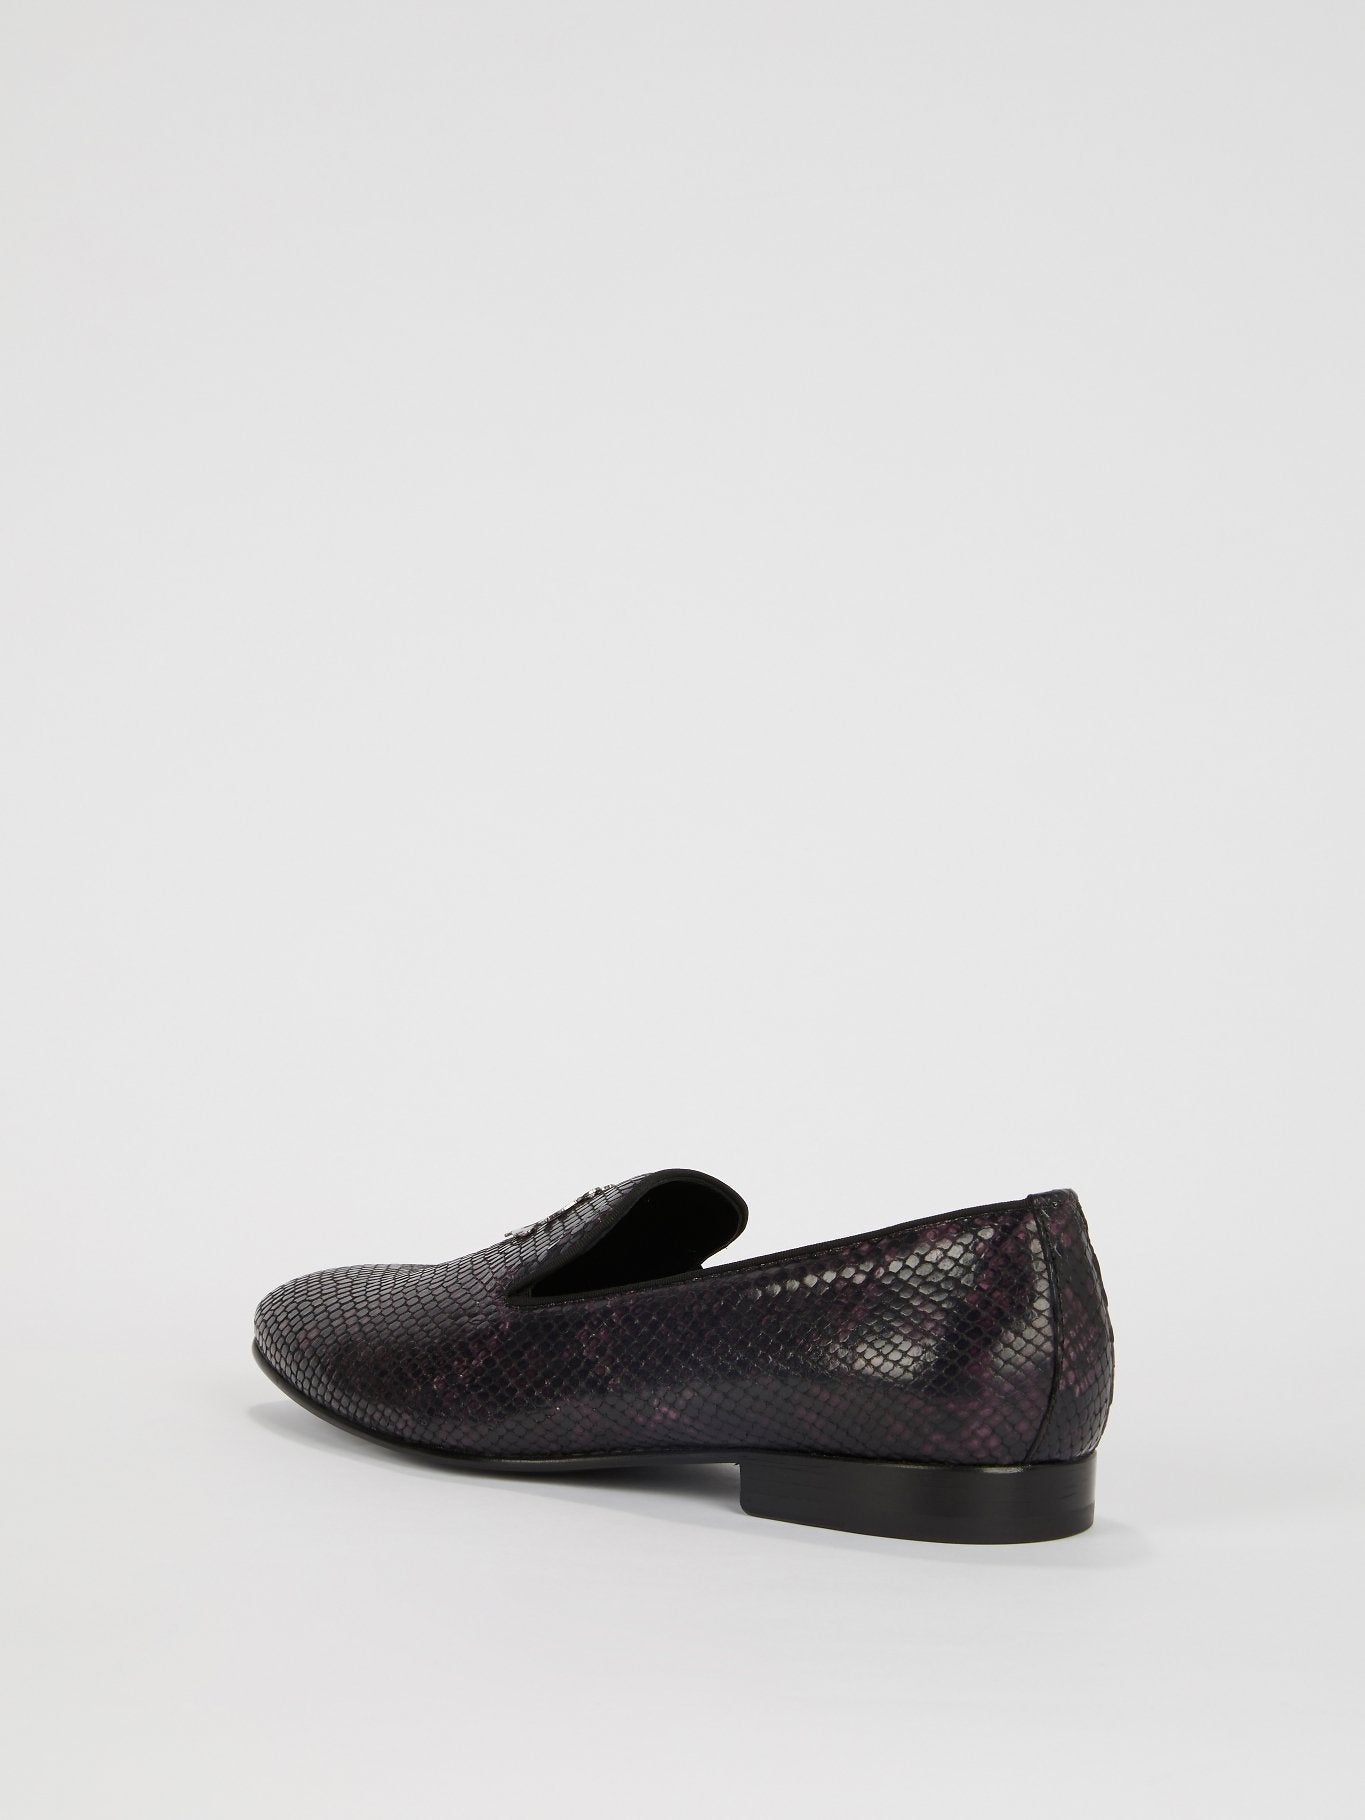 Burgundy Snake-Effect Leather Loafers